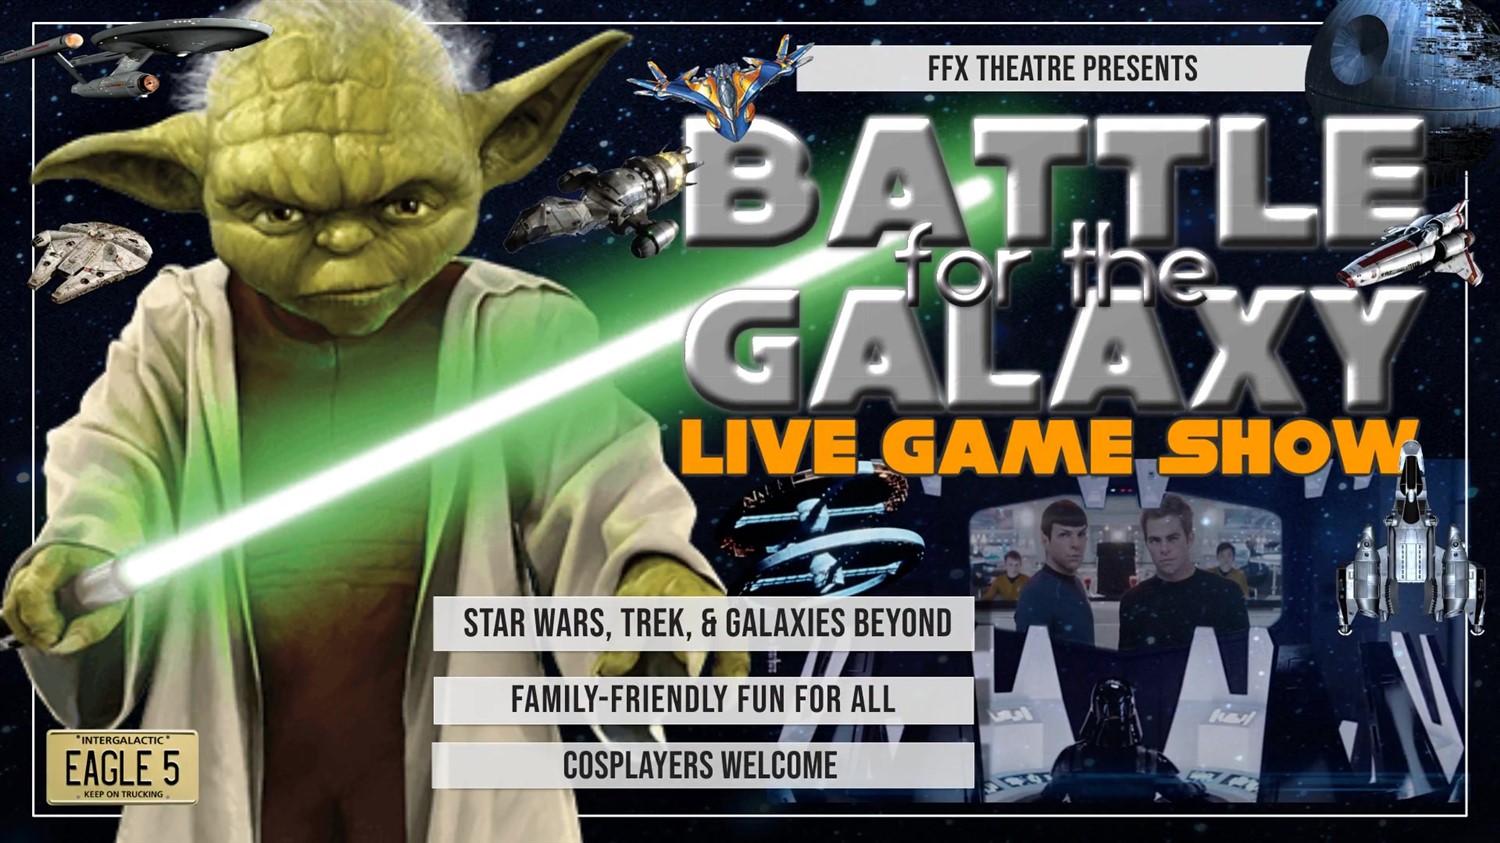 Battle for the Galaxy: Live Game Show  on Jan 29, 19:00@FFX Theatre - Buy tickets and Get information on Family Fun Xperience tickets.ffxshow.org